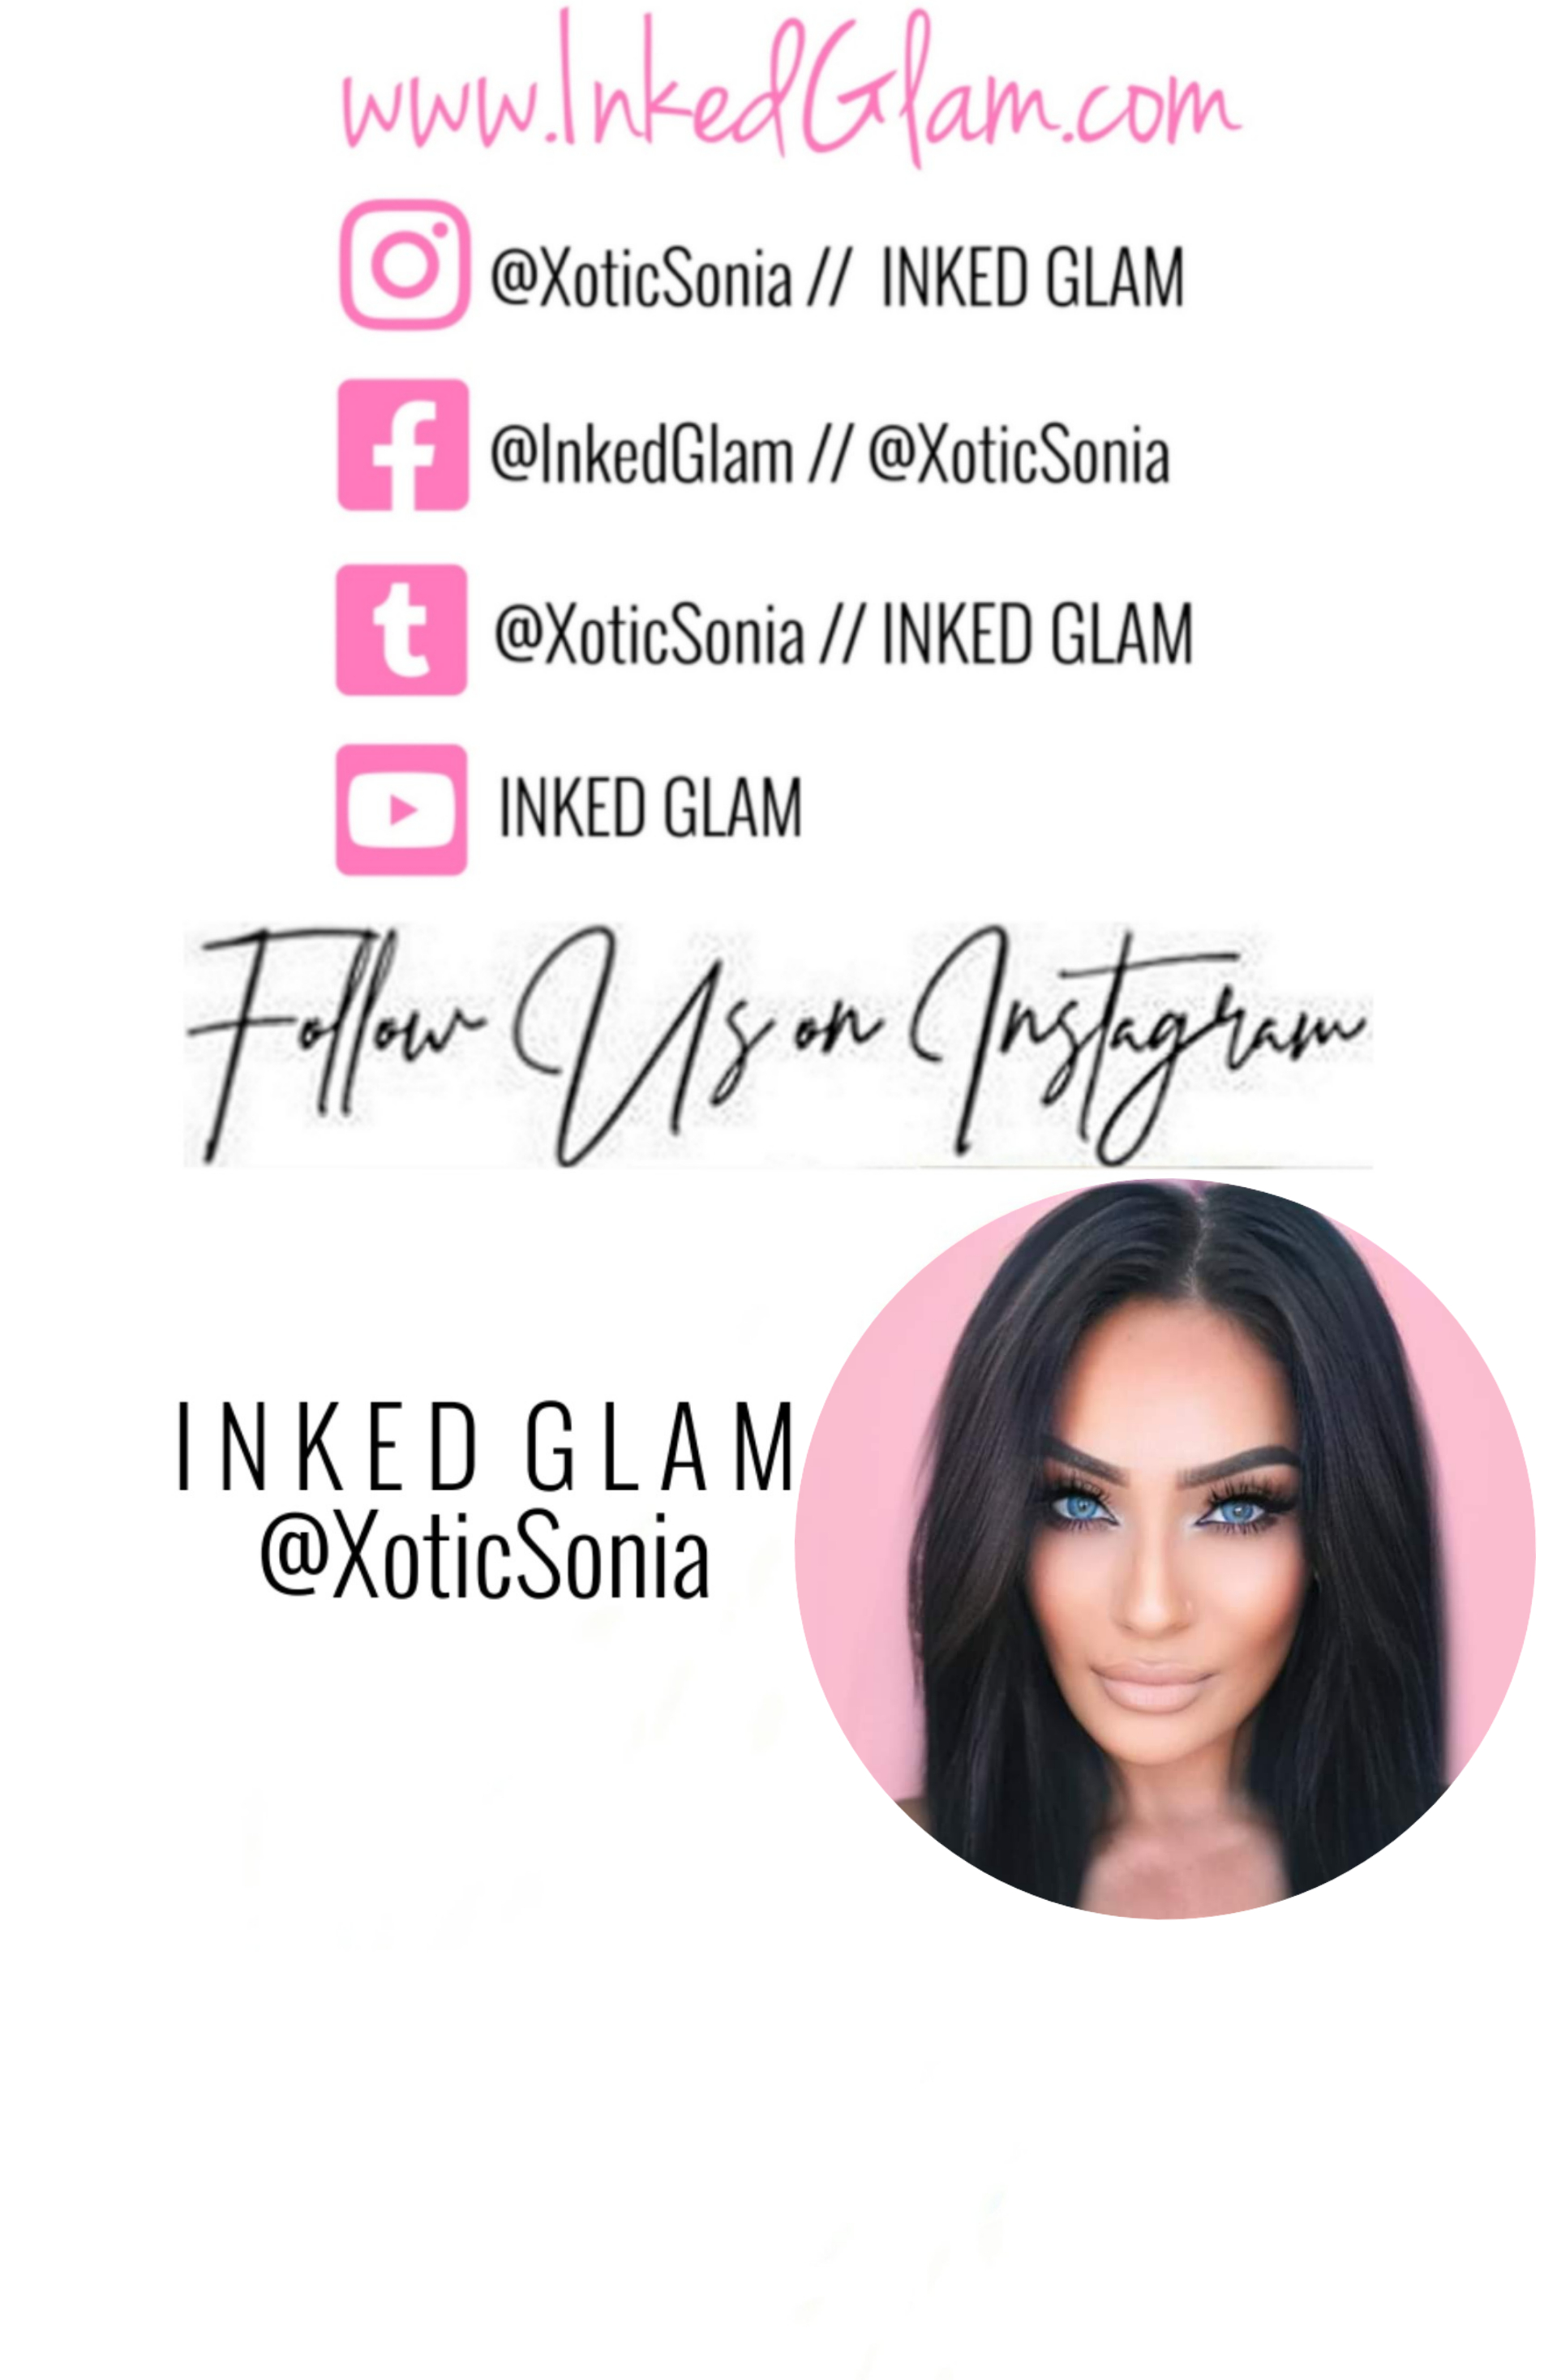 𝓘𝓷𝓴𝓮𝓭 G L A M - LUXE Lifestyle Blog | www.InkedGlam.com